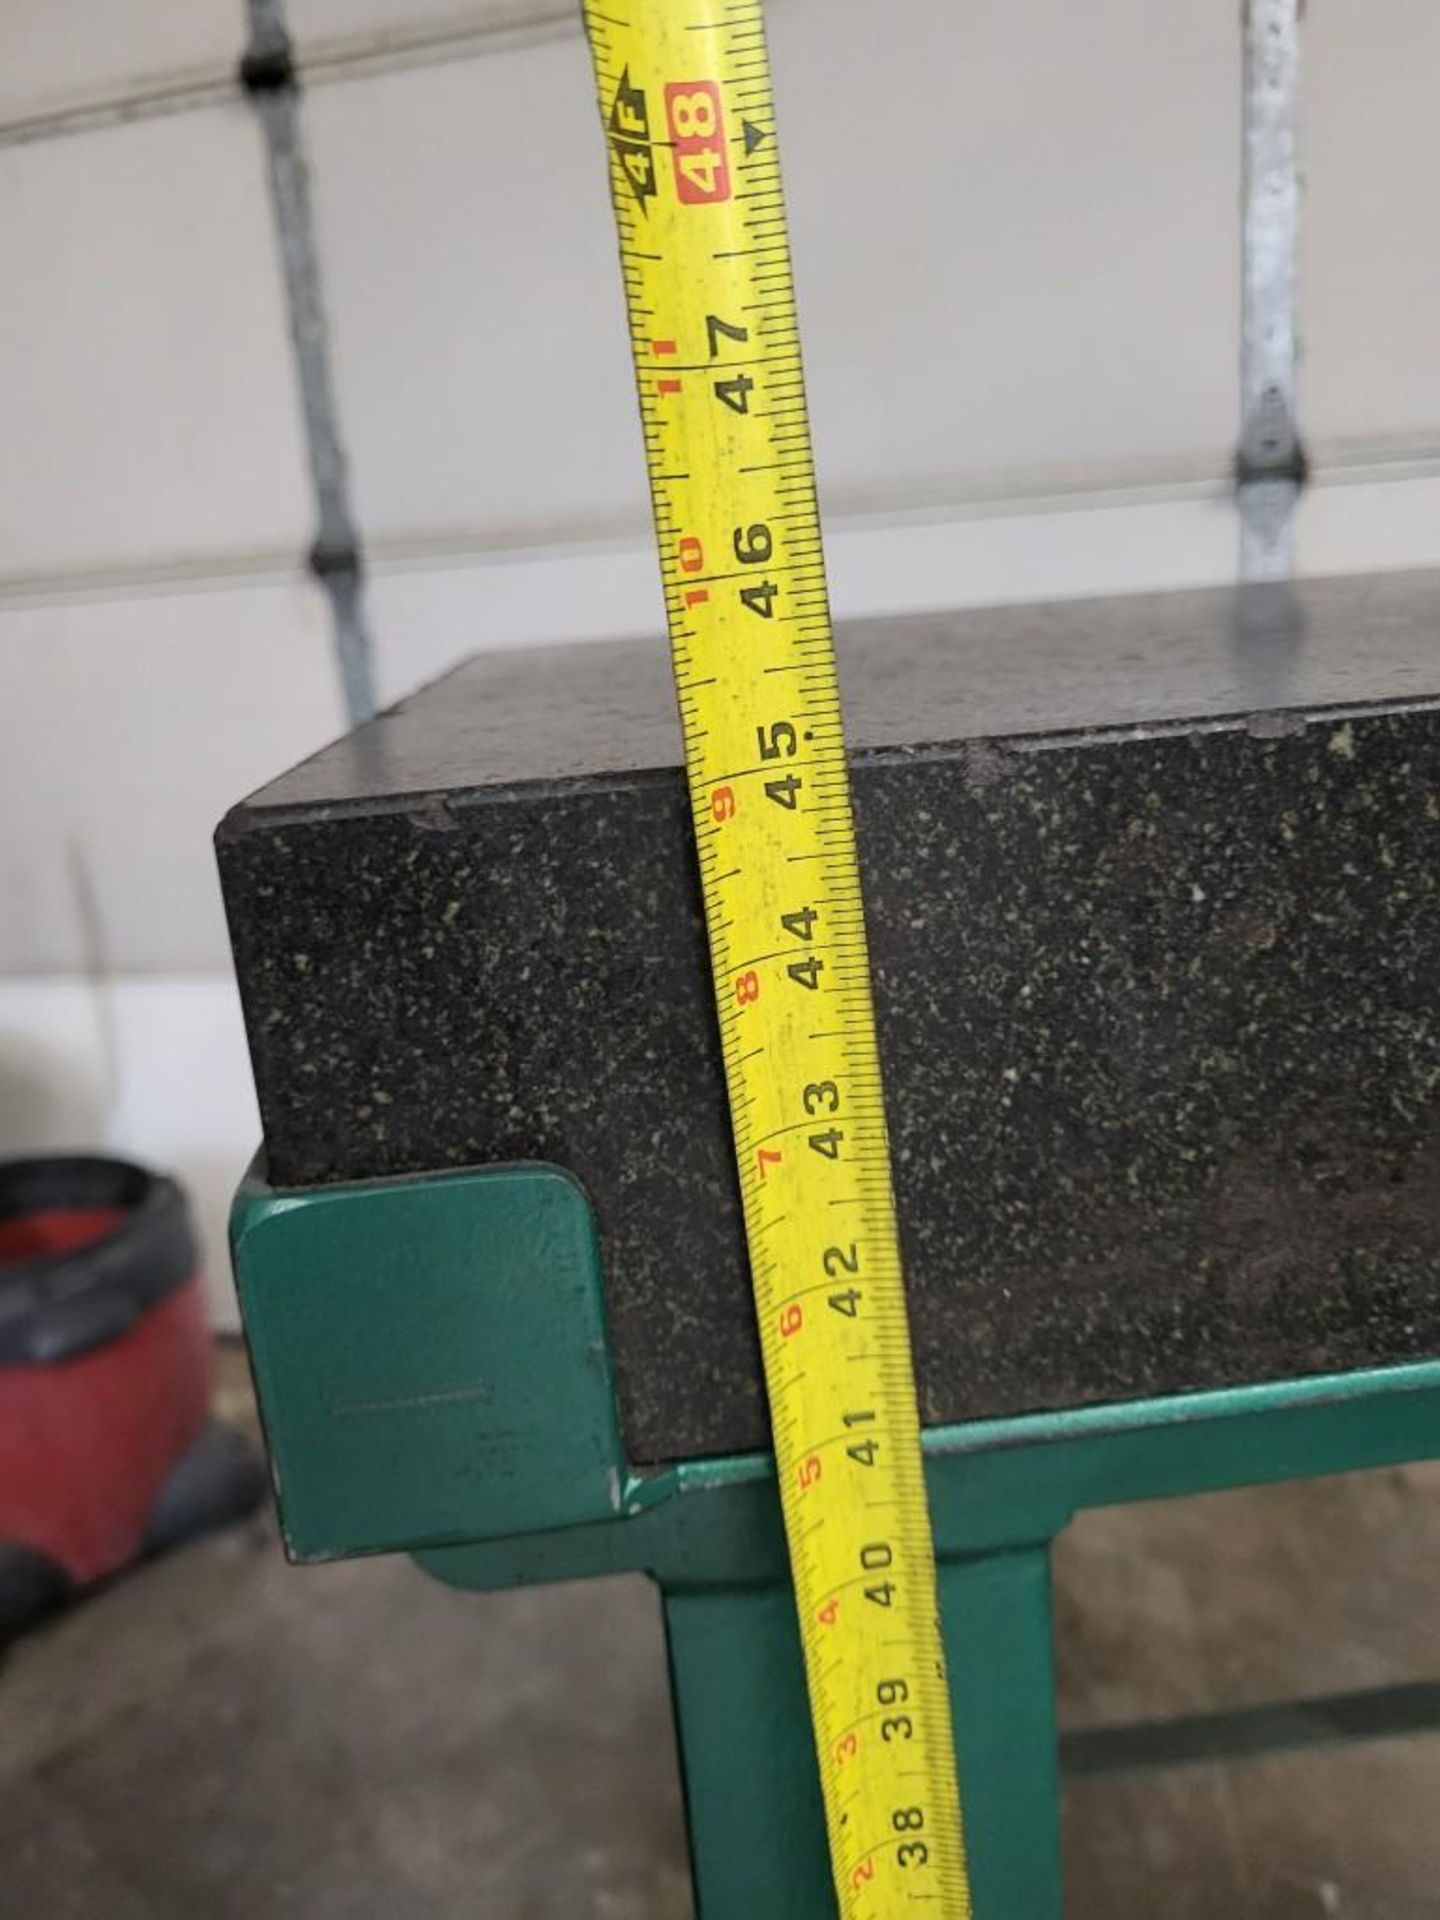 BLACK GRANITE INSPECTION TABLE WITH STAND - Image 8 of 8